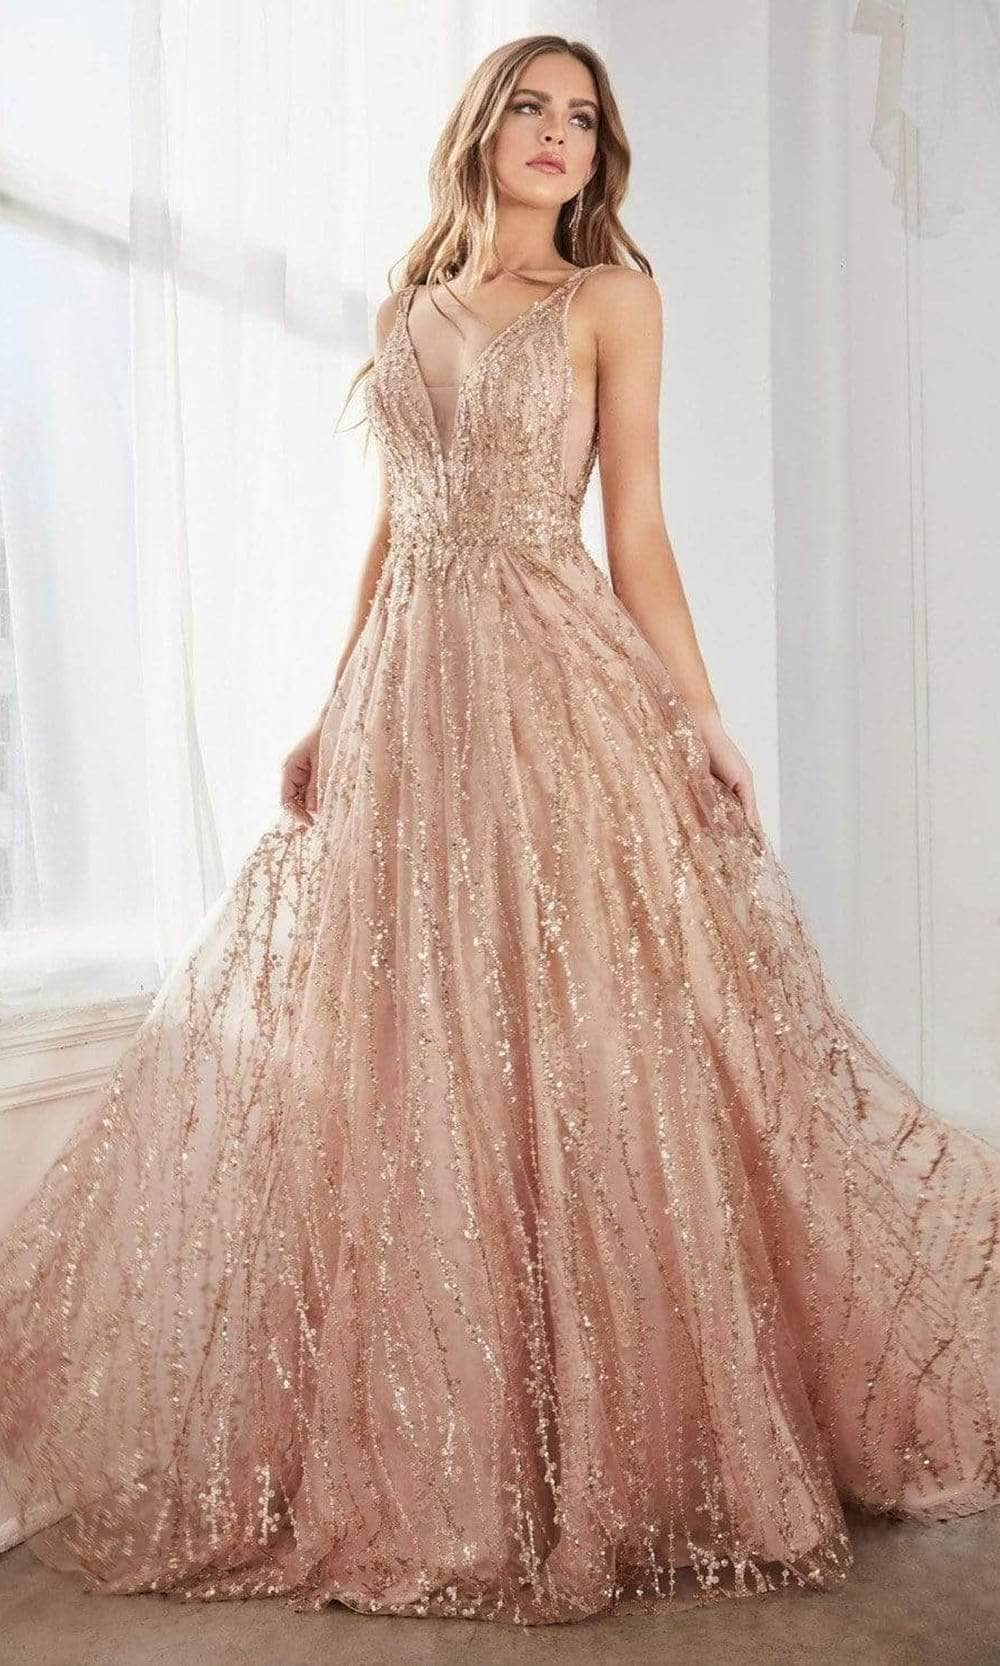 Cinderella Divine - Sequin Embellished A-Line Prom Dress C32 - 1 pc Rose Gold In Size 8 Available CCSALE 8 / Rose Gold